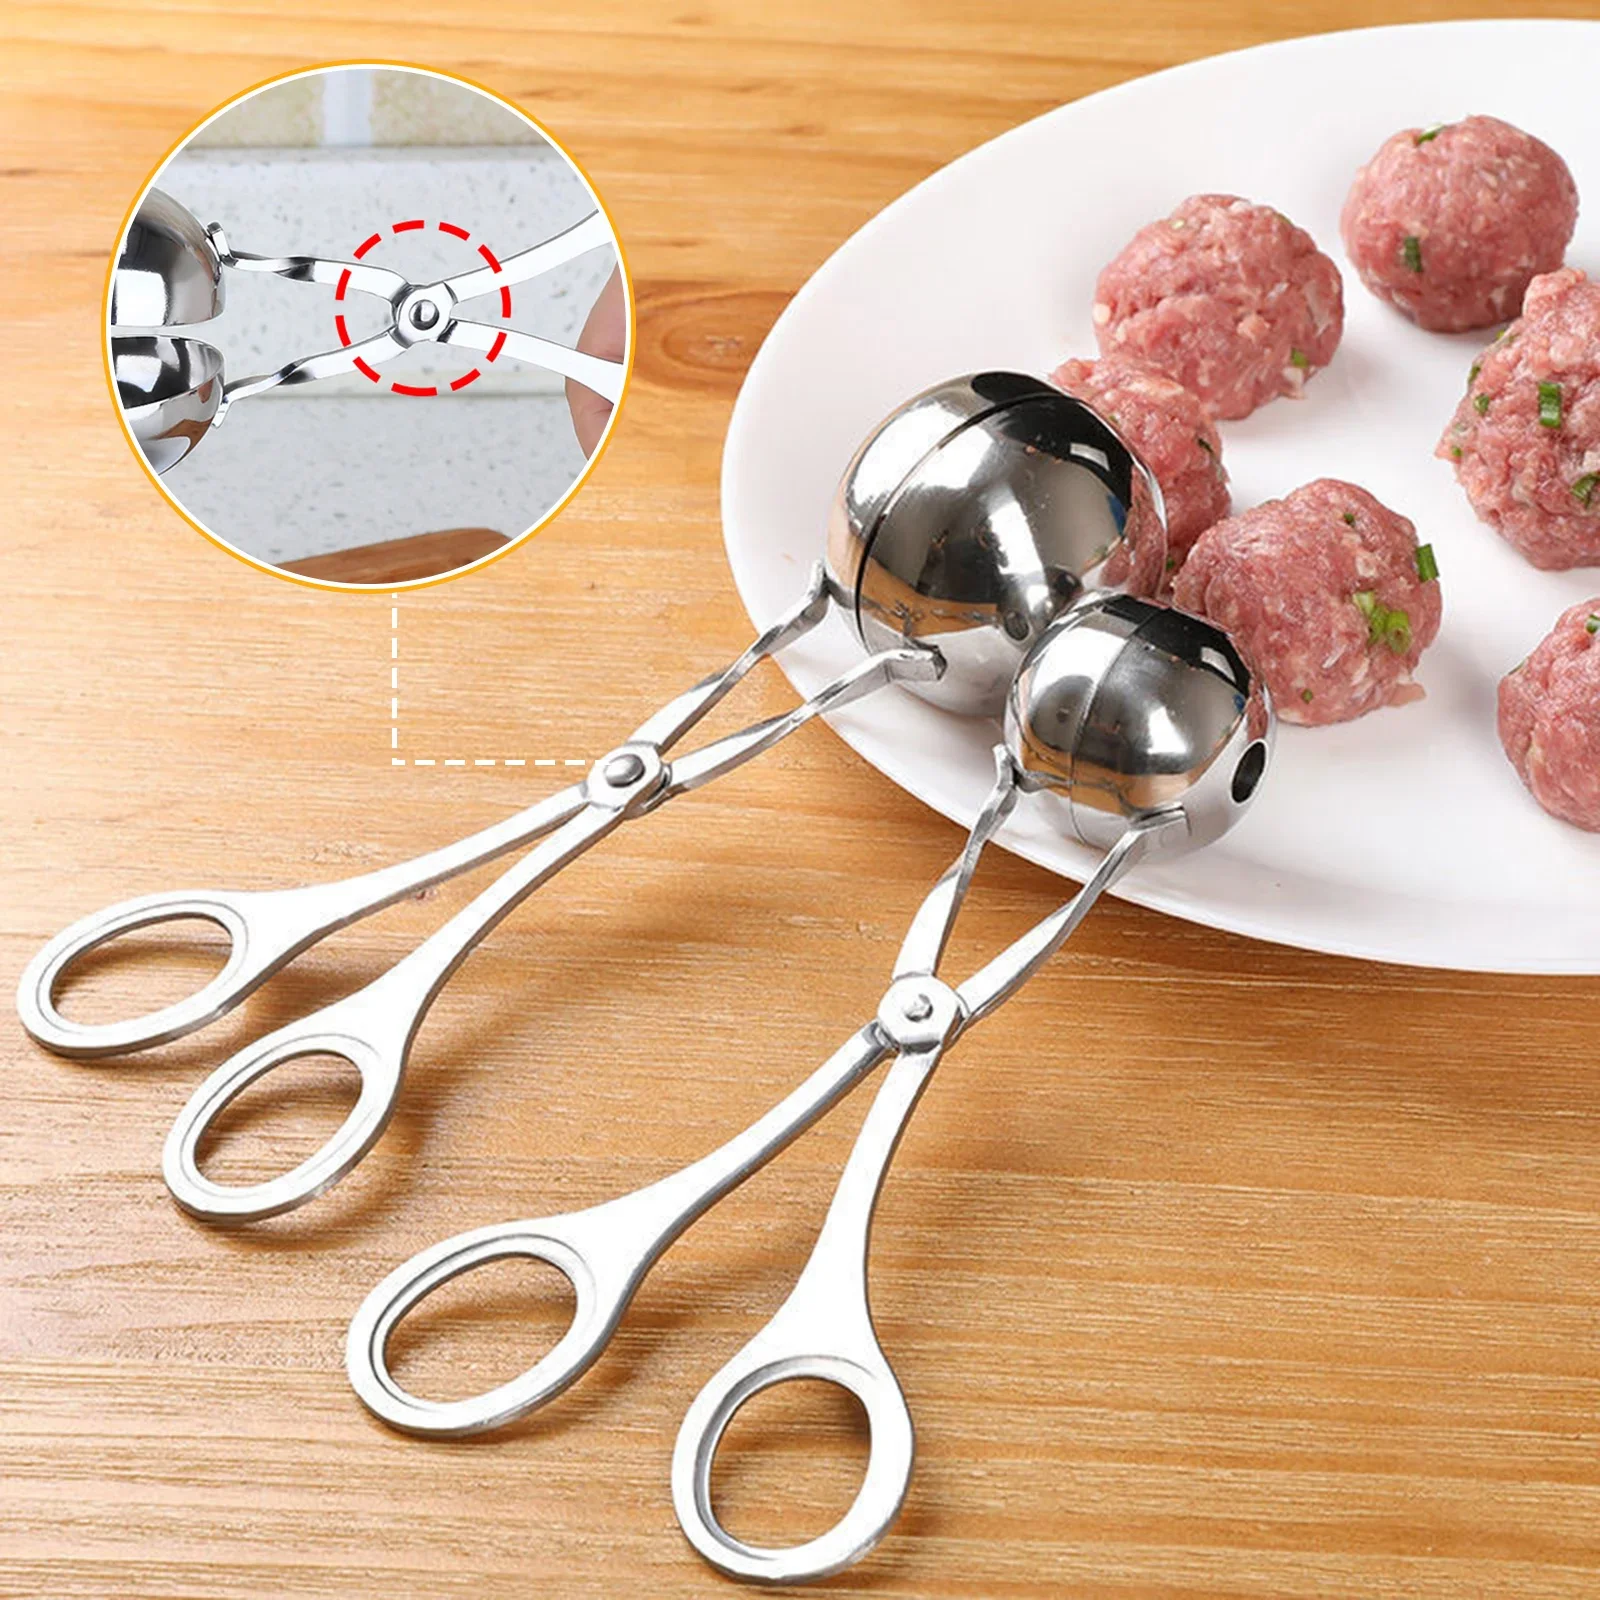 

Steel Meatball Maker Clip Stainless Ball Fish Ball Rice Ball Making Mold Form Tool Kitchen Accessories Gadgets Cuisine